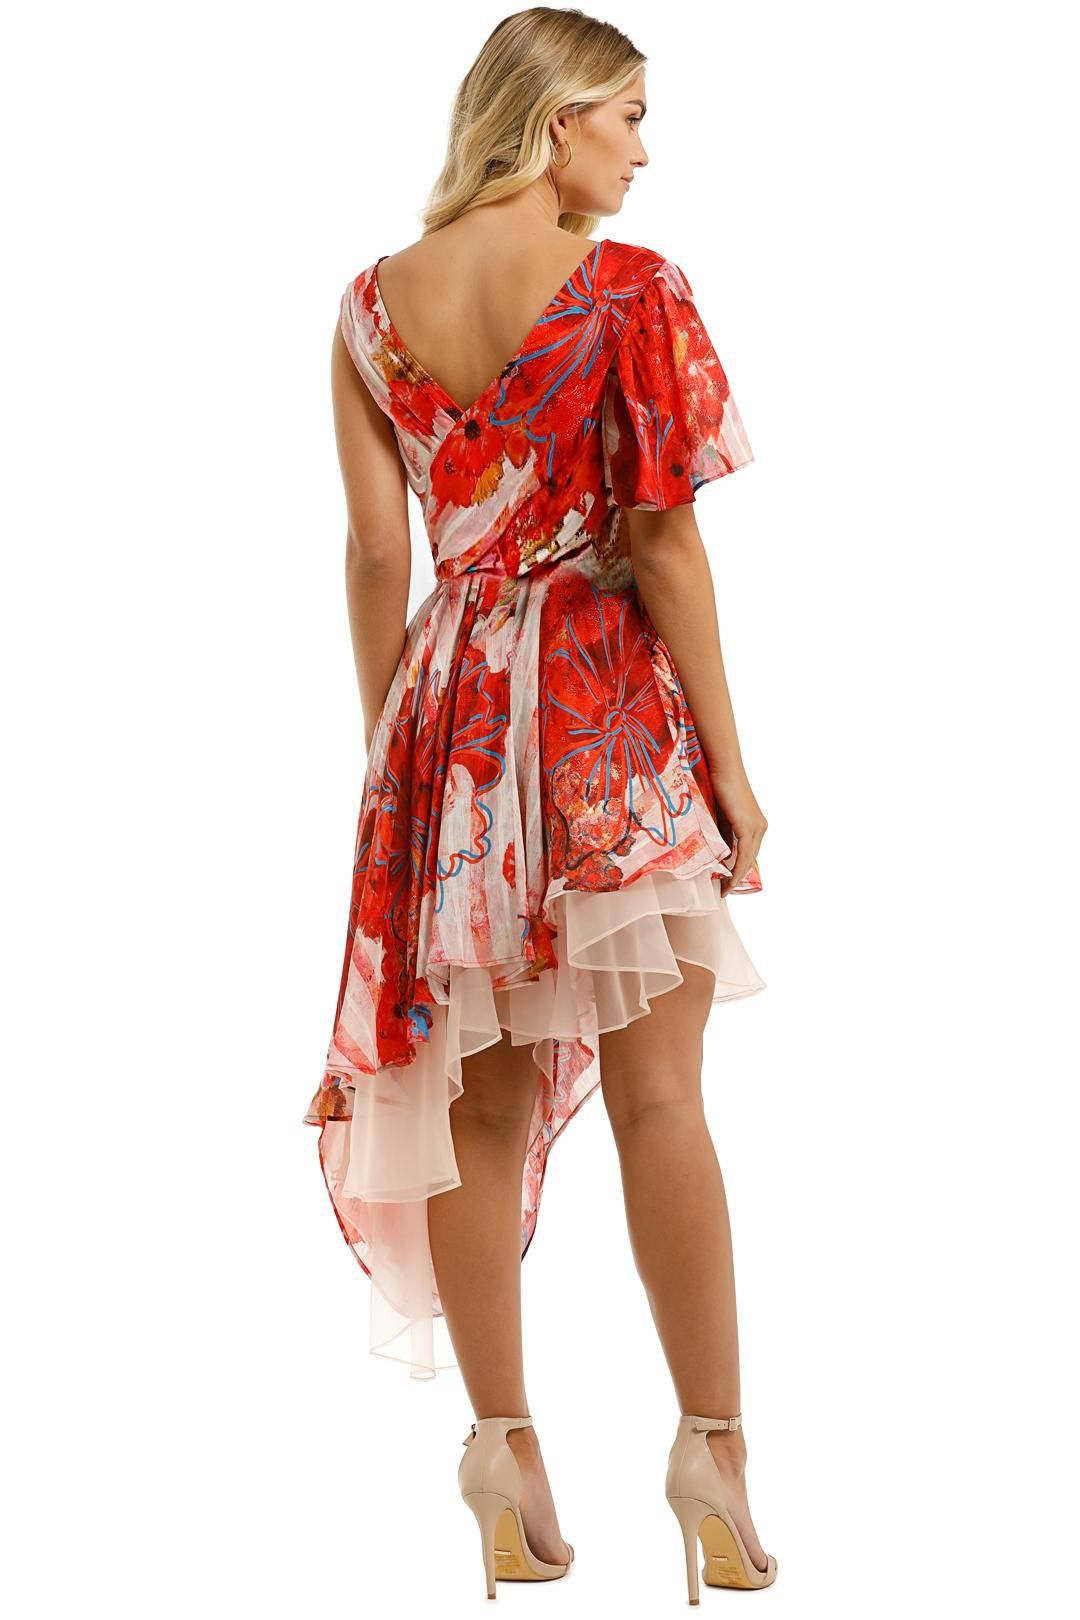 Leo-and-Lin-Blossom-Silk-Linen-Dress-Red-Floral-Print